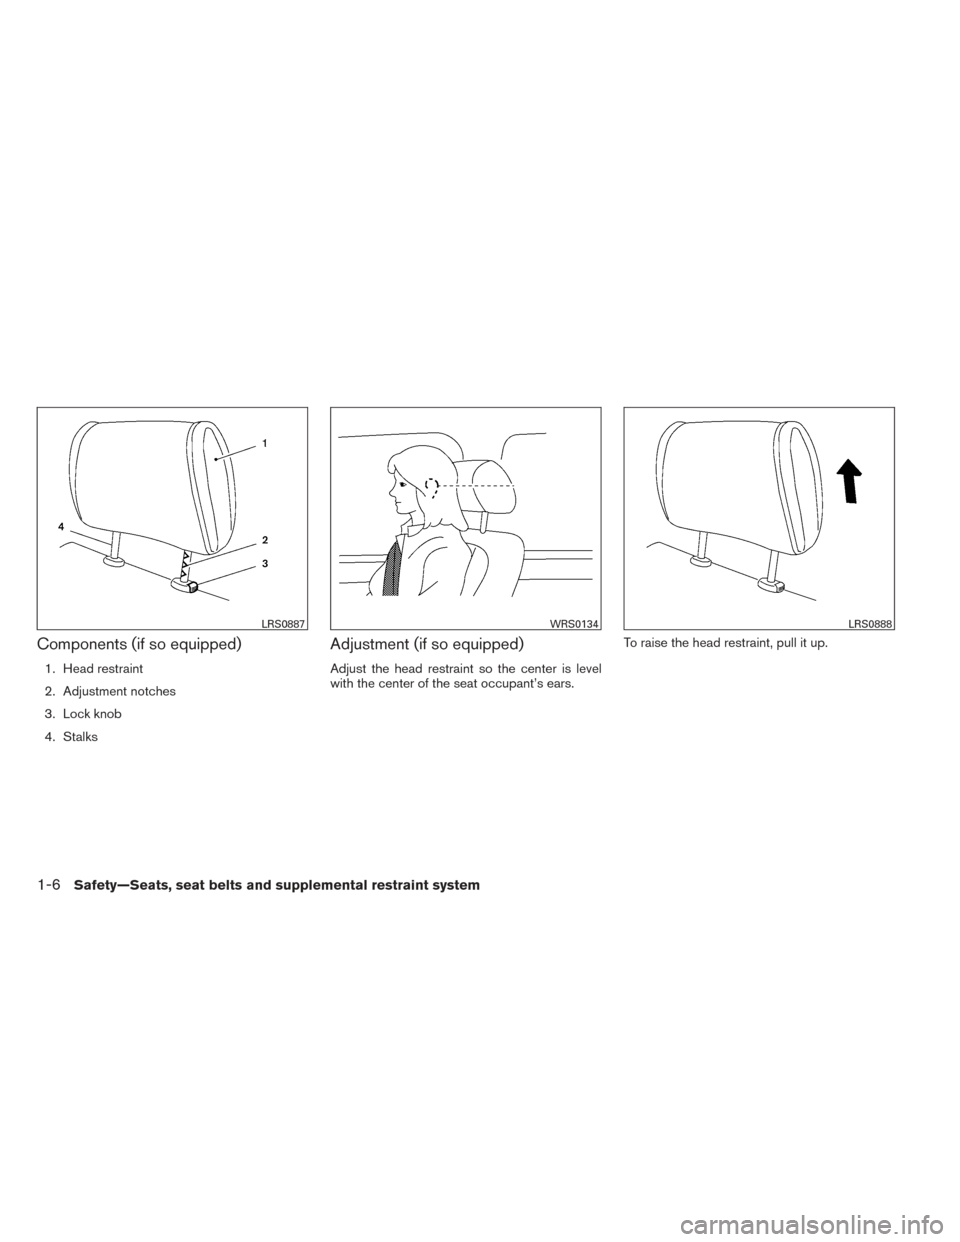 NISSAN VERSA SEDAN 2014 2.G Owners Manual Components (if so equipped)
1. Head restraint
2. Adjustment notches
3. Lock knob
4. Stalks
Adjustment (if so equipped)
Adjust the head restraint so the center is level
with the center of the seat occu